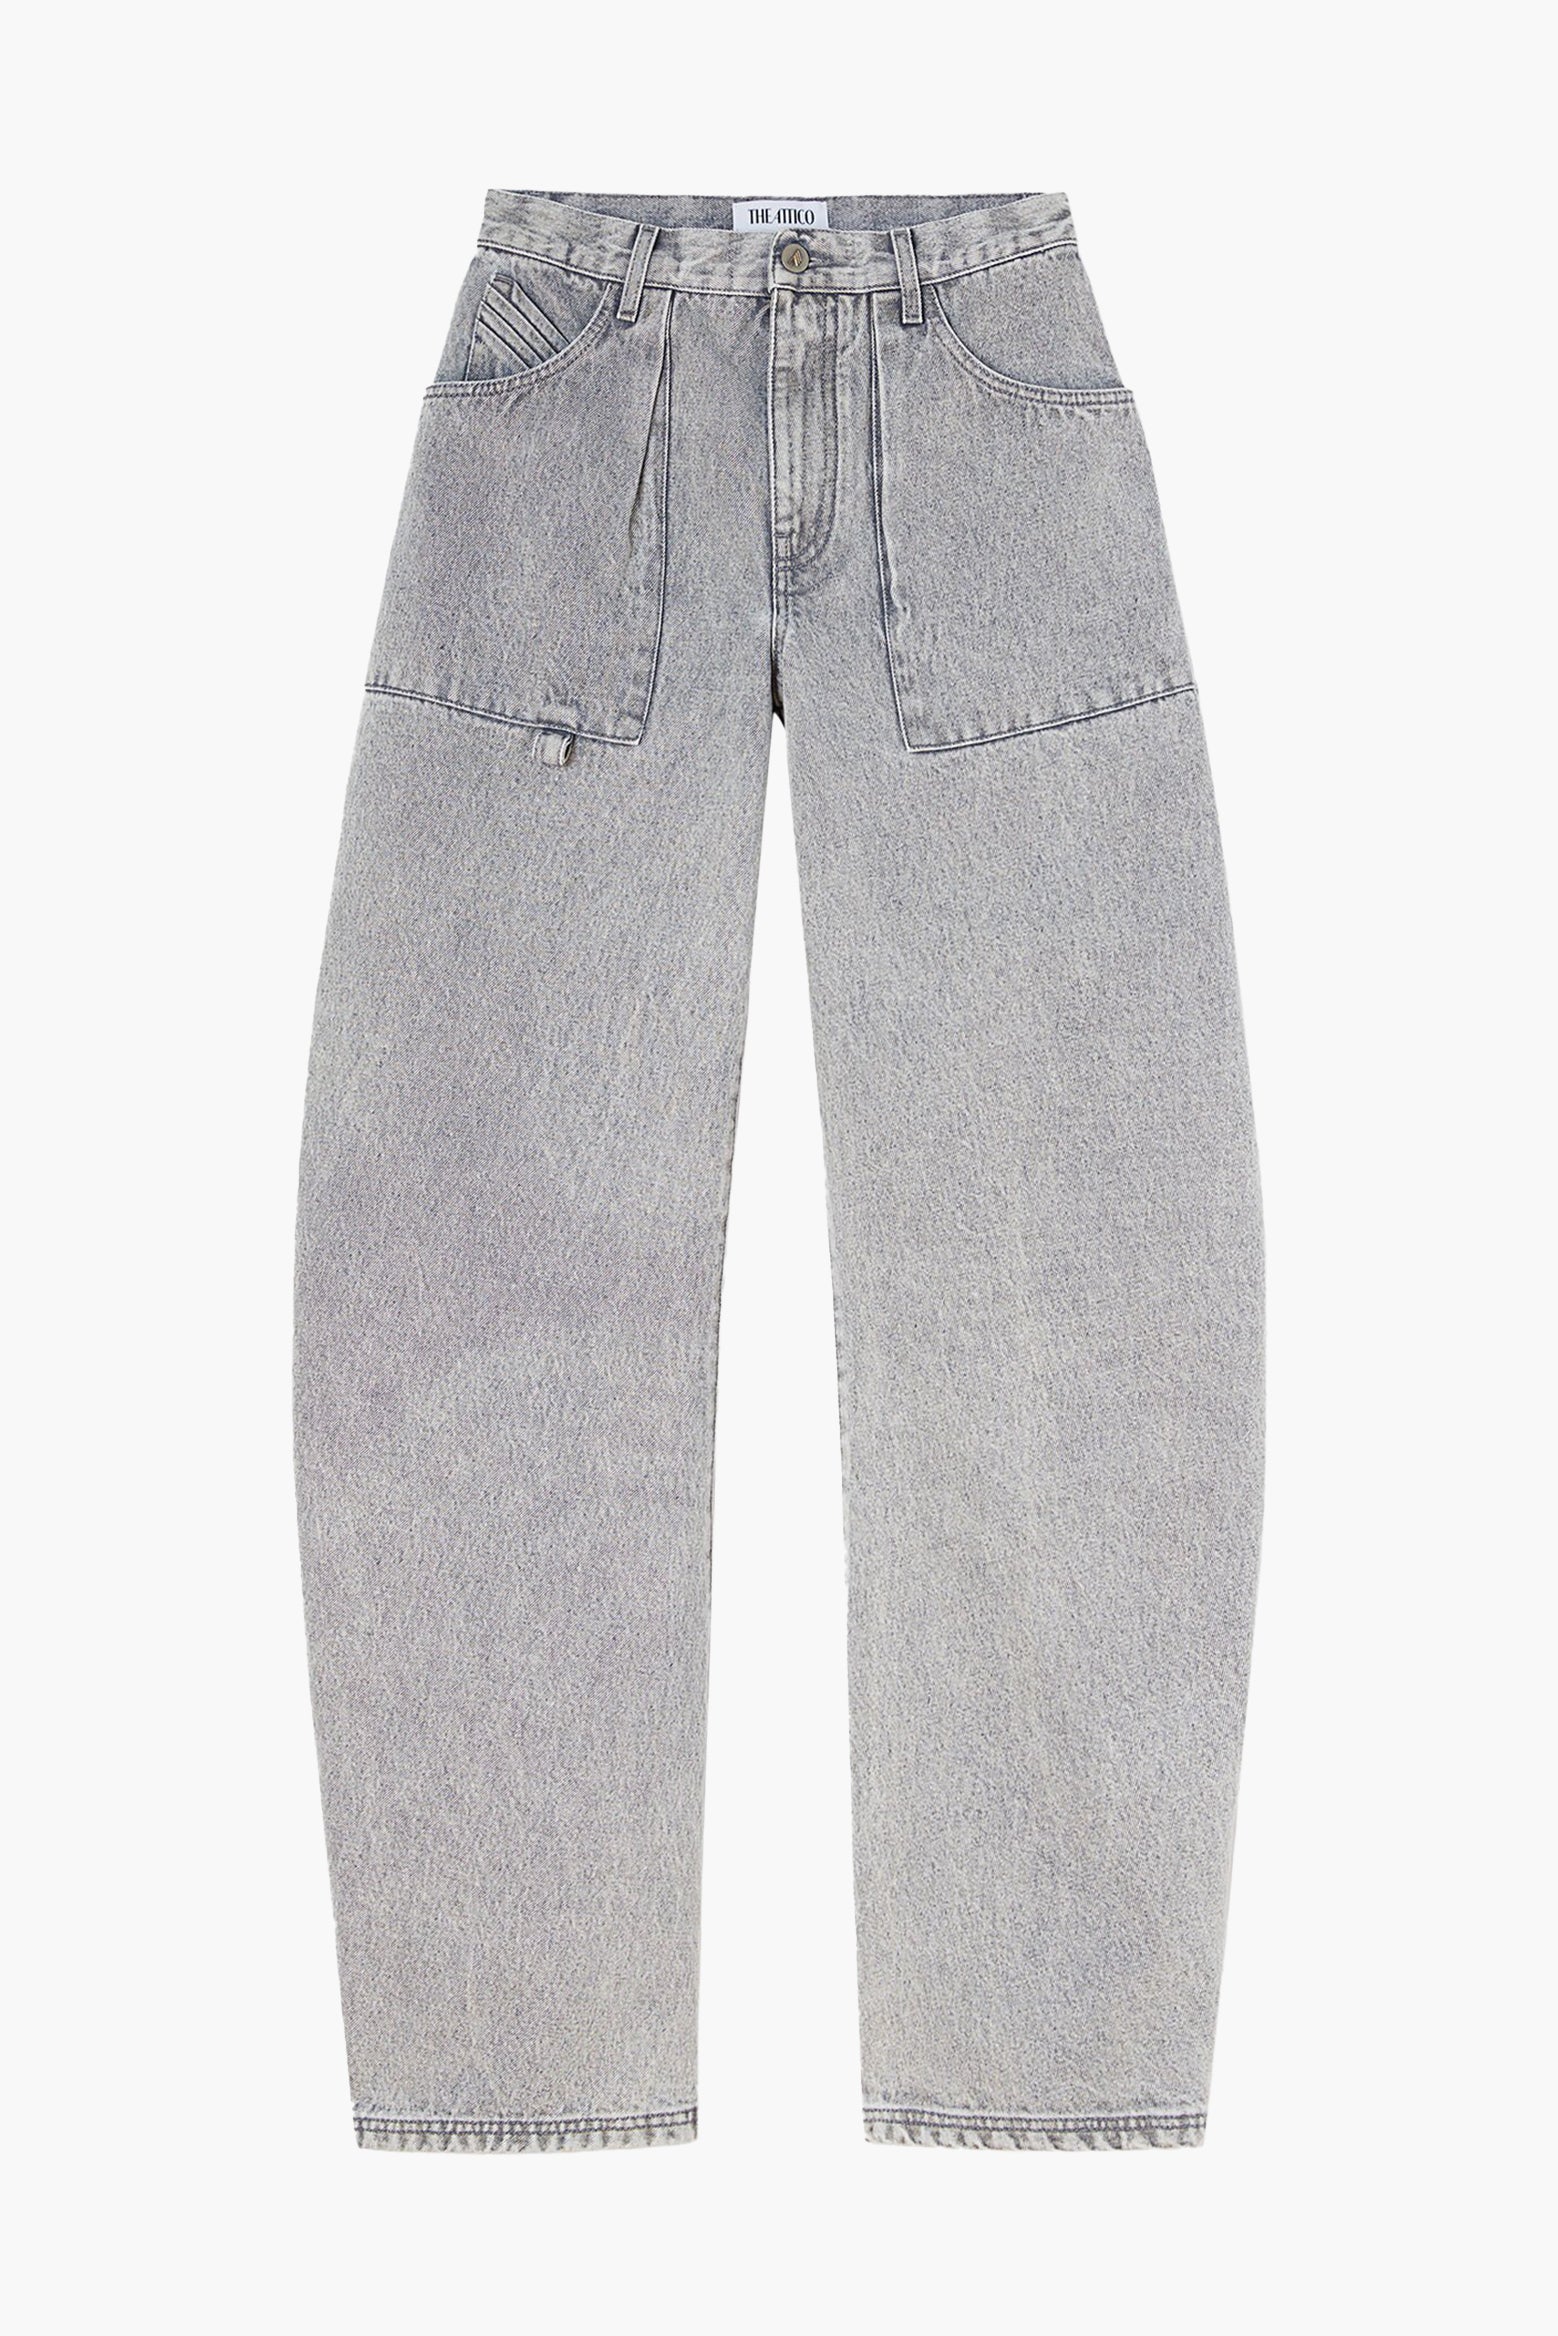 The Attico Effie Long Pants in Light Grey Available at The New Trend Australia